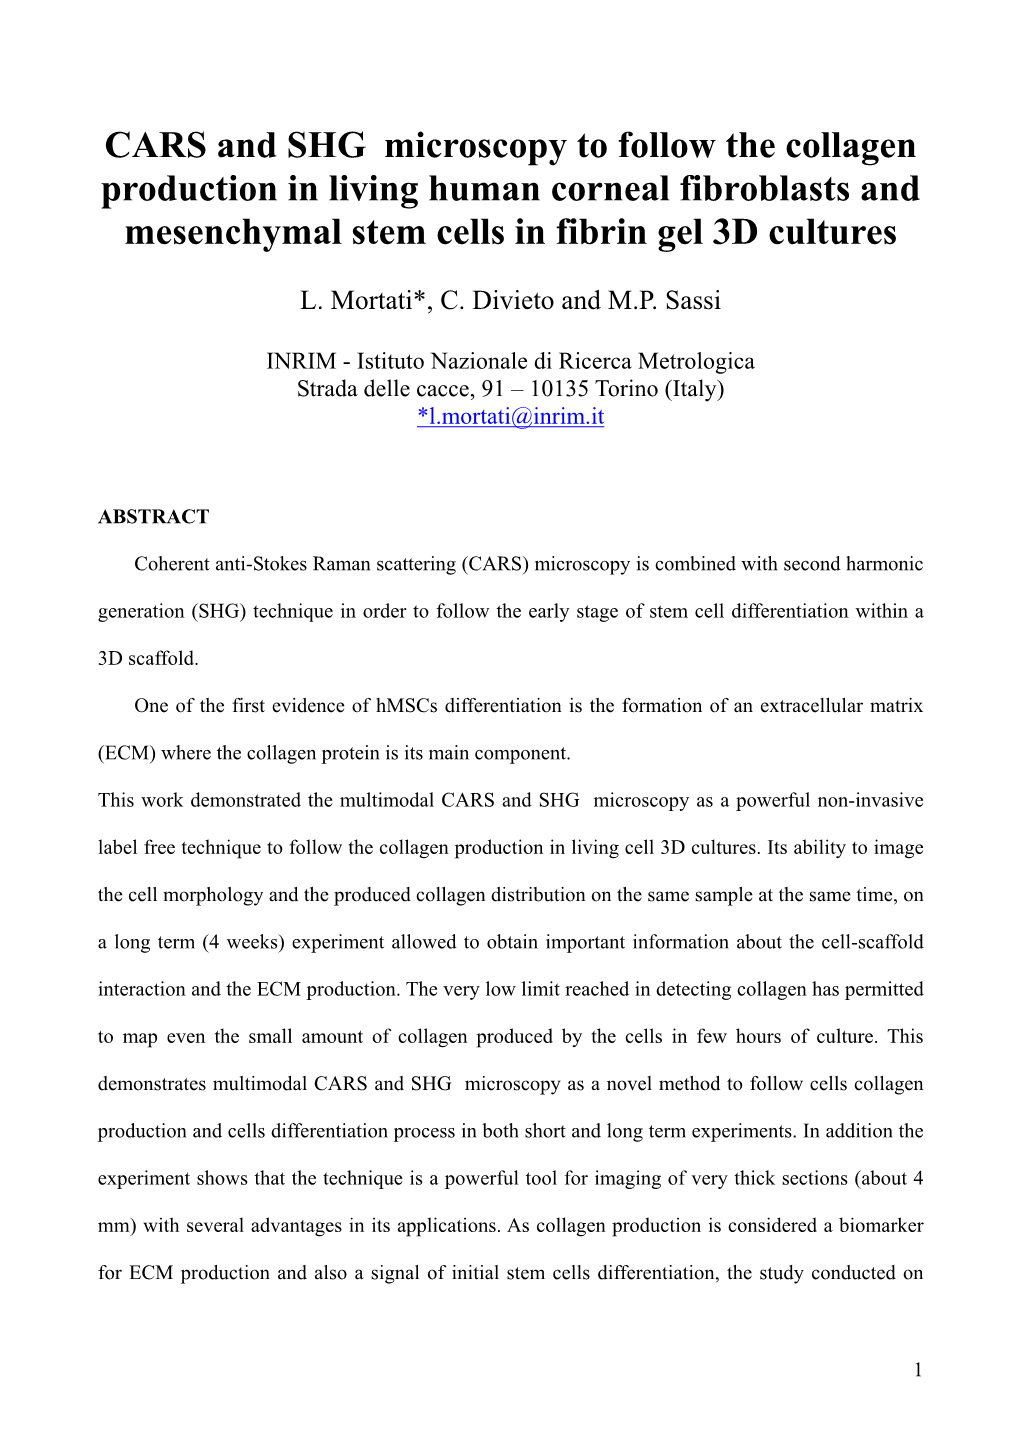 CARS and SHG Microscopy to Follow the Collagen Production in Living Human Corneal Fibroblasts and Mesenchymal Stem Cells in Fibrin Gel 3D Cultures